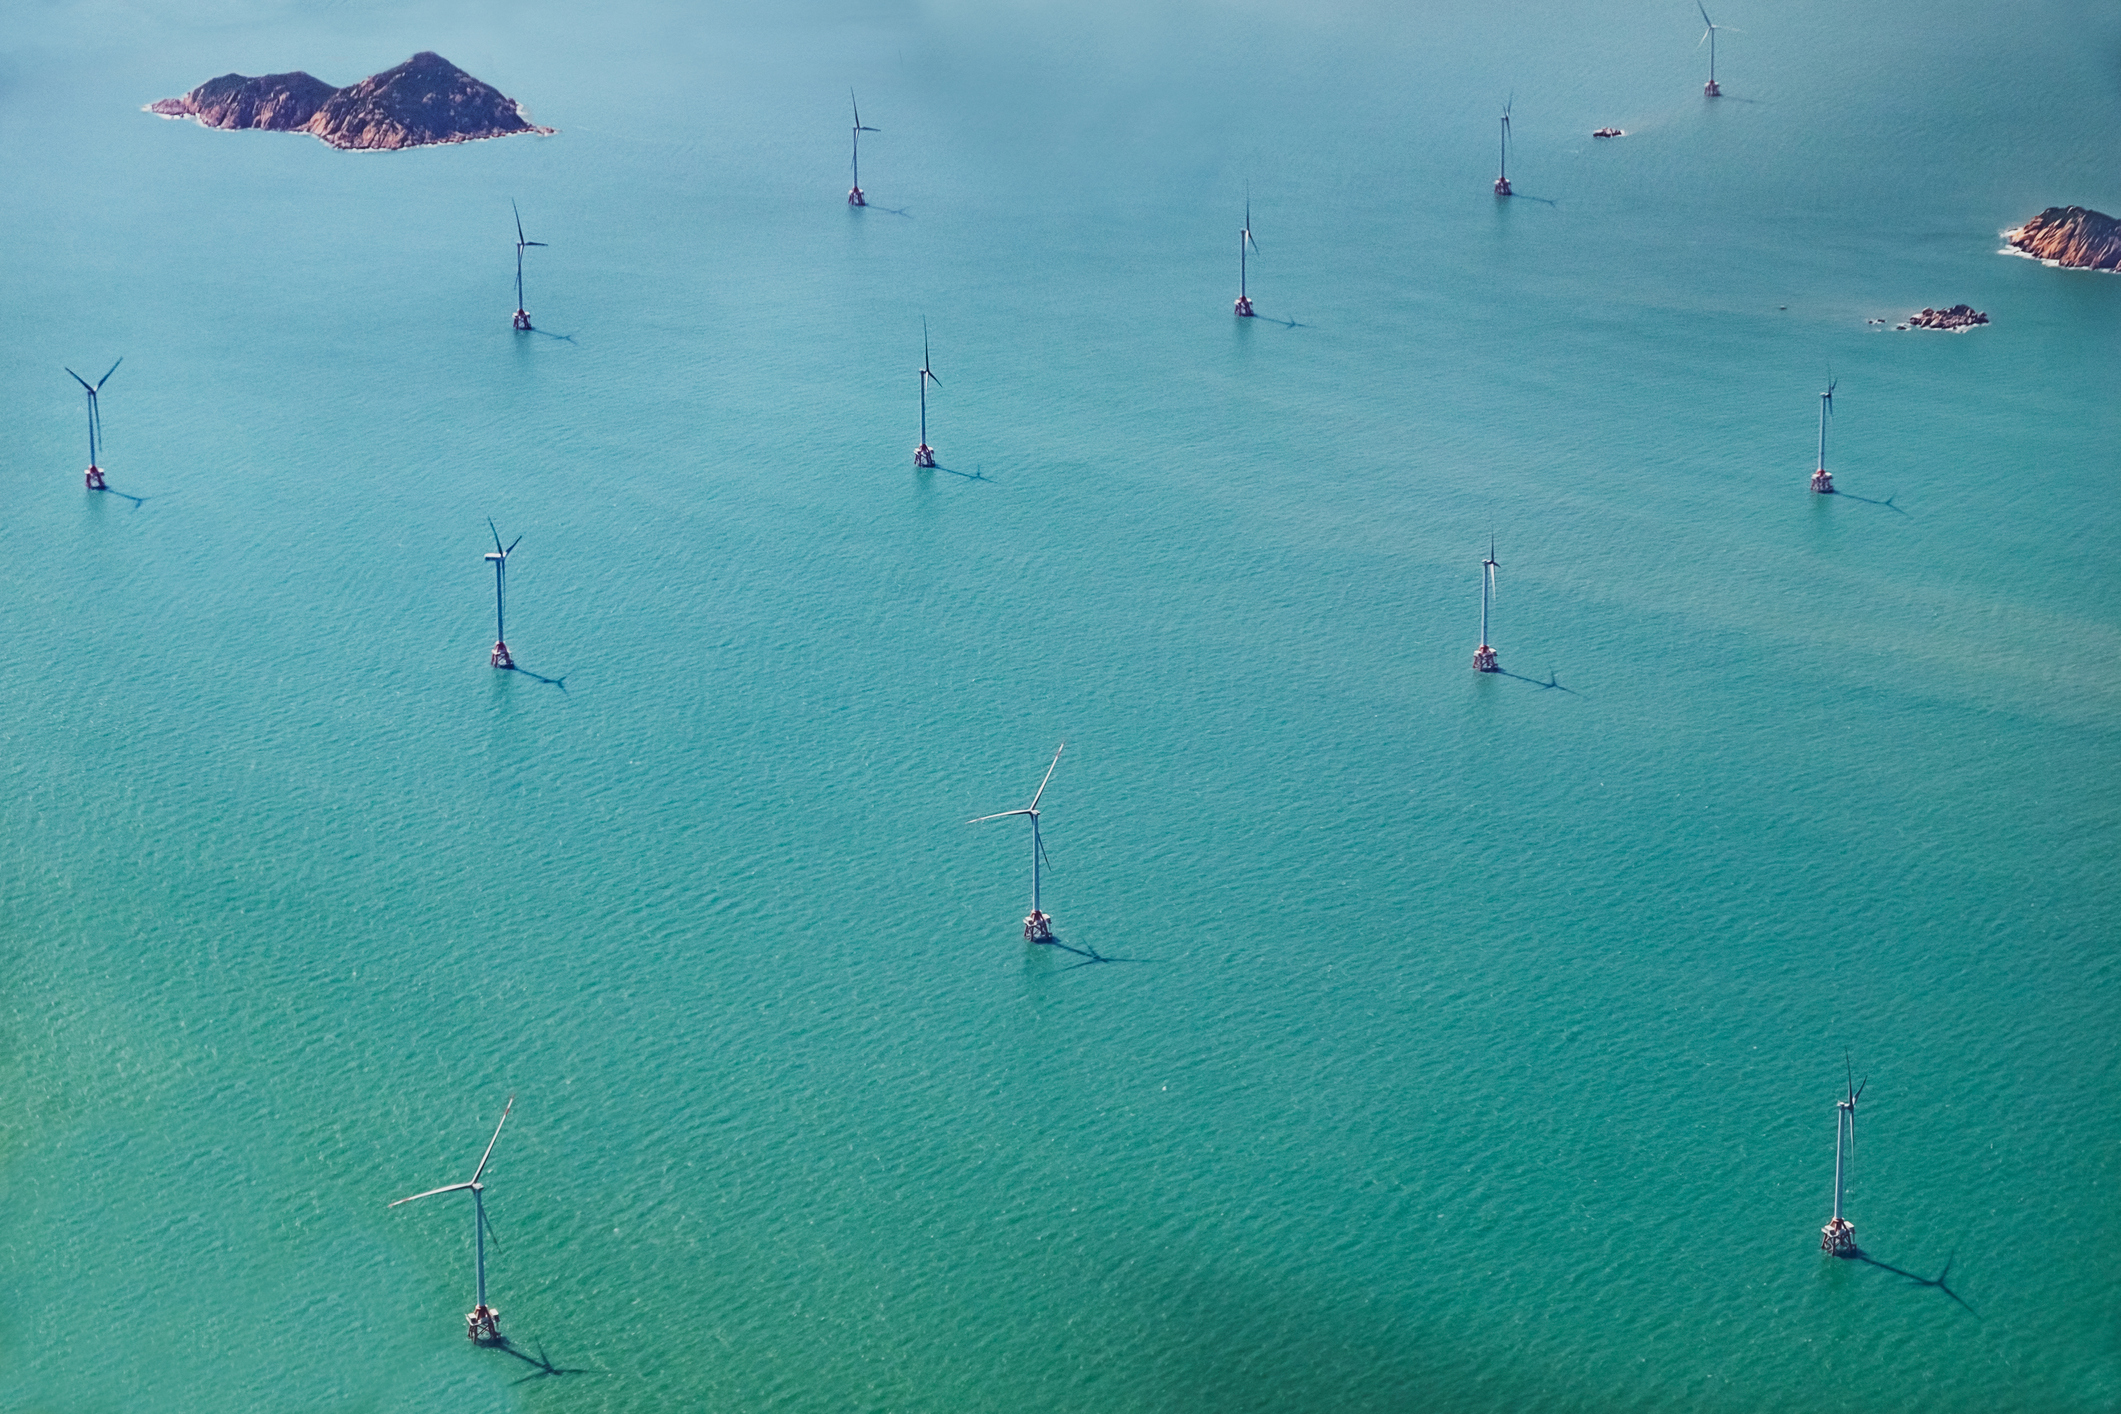 Ming Yang sizes up first foray into Brazil offshore wind amid profit surge